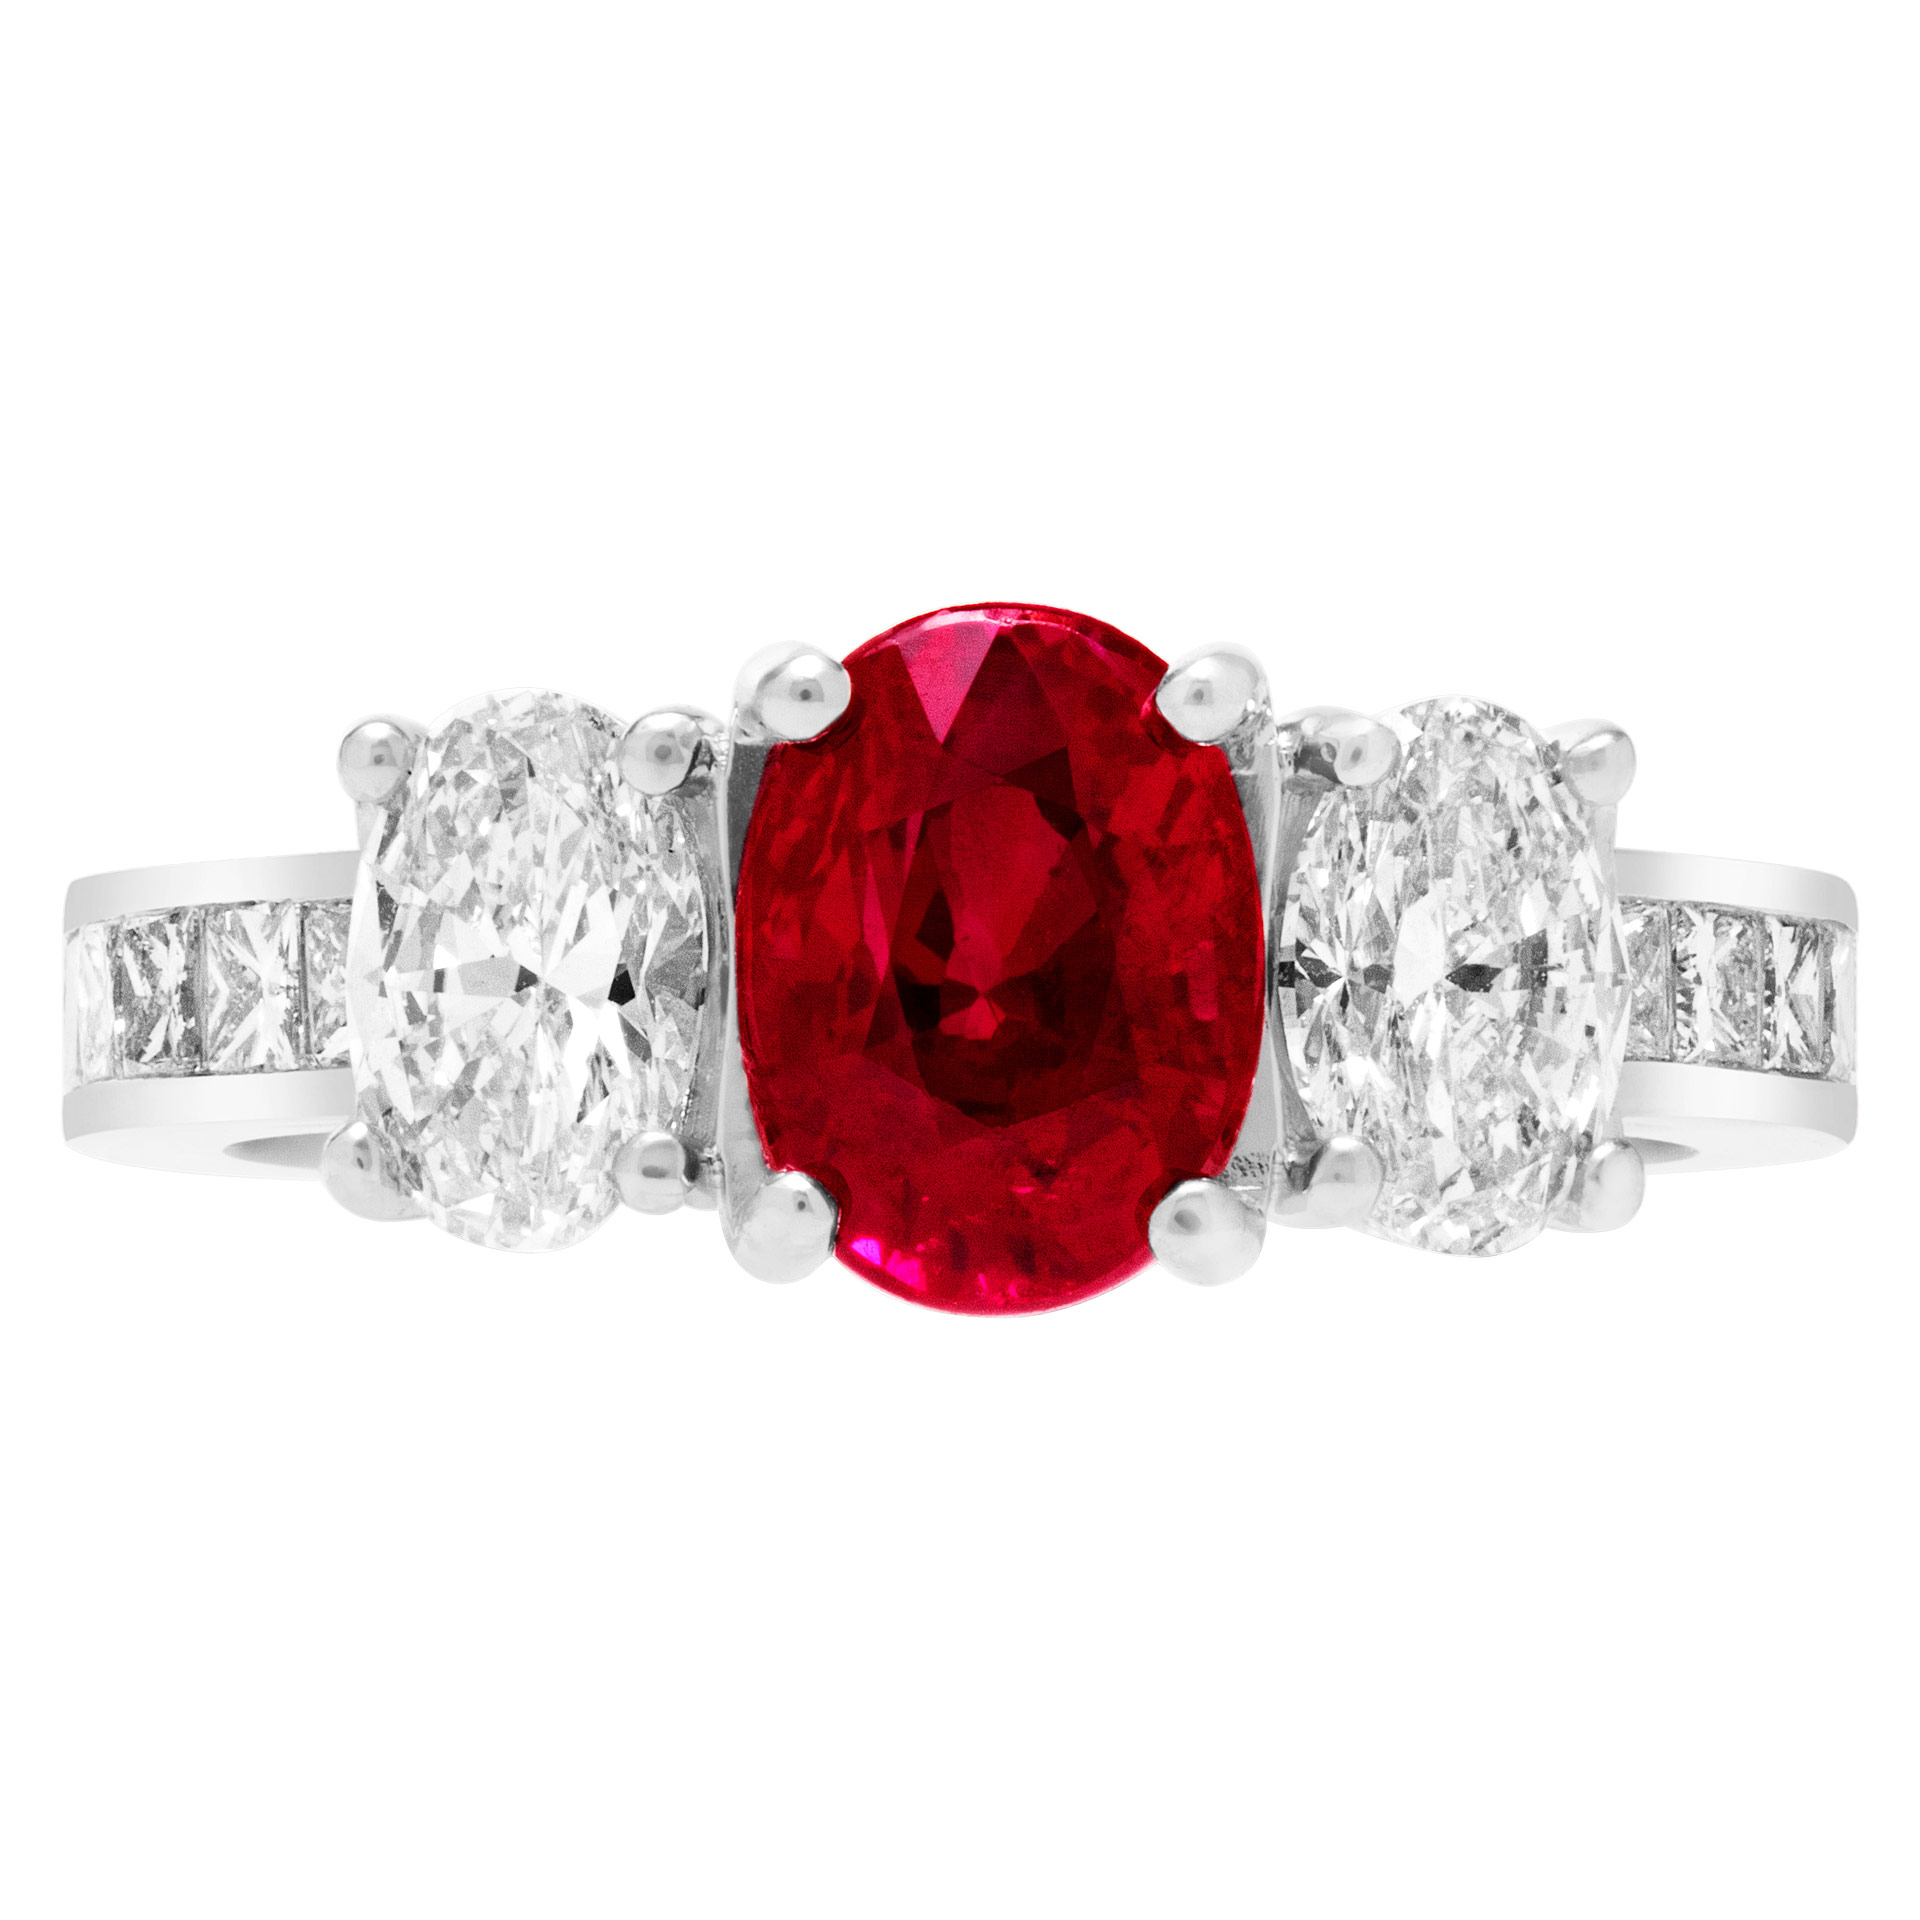 GIA certified ruby & diamond ring with 2 cts Burma ruby & two 0.50 ct oval dia & princess cut dia image 1